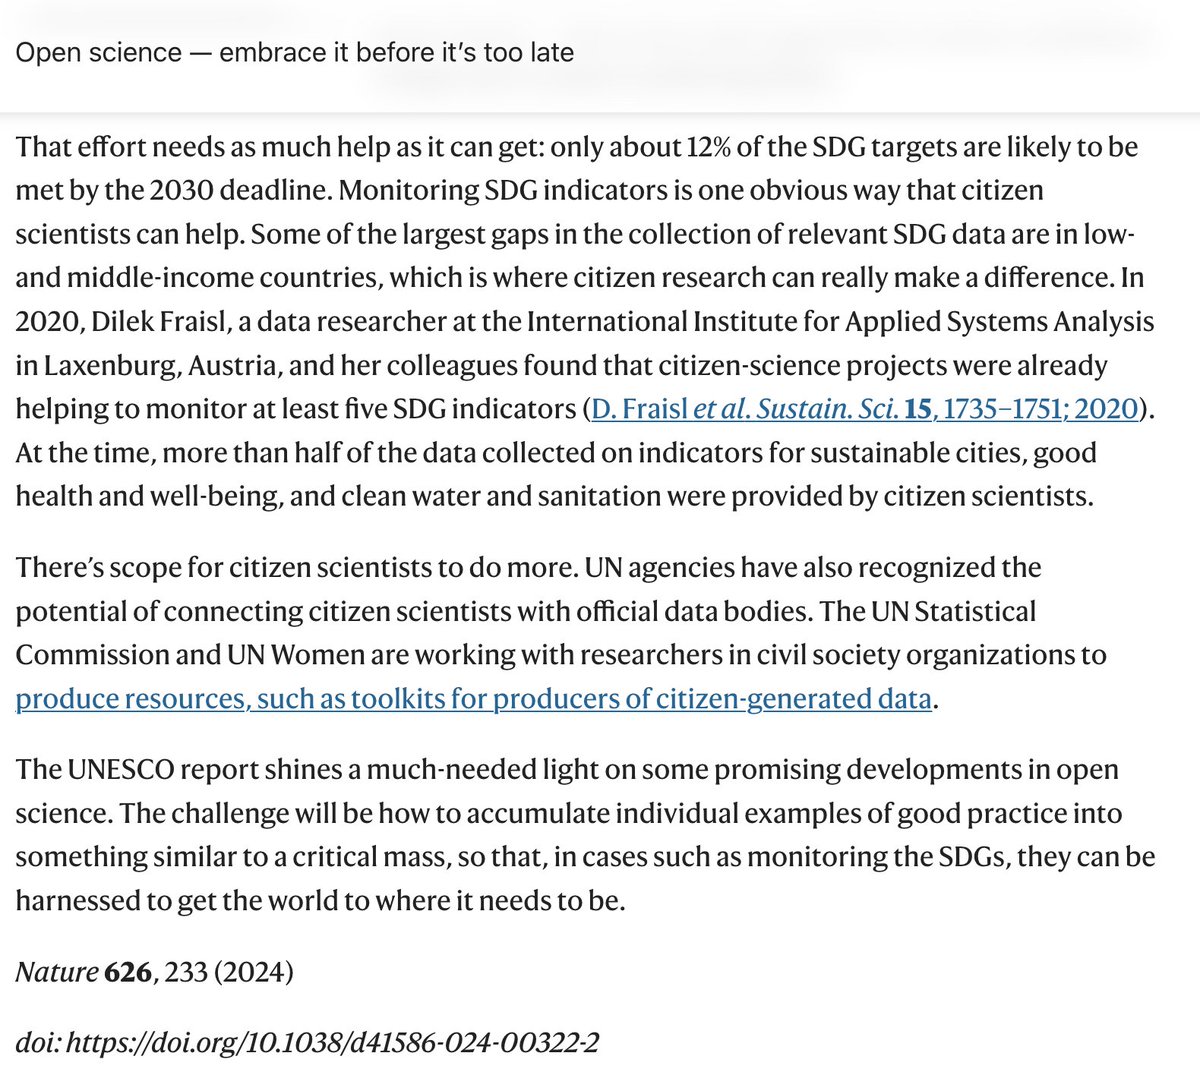 On this #OpenDataDay, I'm glad to share that in this recently published @Nature editorial on #openscience, the results of our work mapping #citizenscience contributions to the #SDGs are highlighted. 'Greater awareness on citizen science could aid efforts to achieve the SDGs' ⬇️